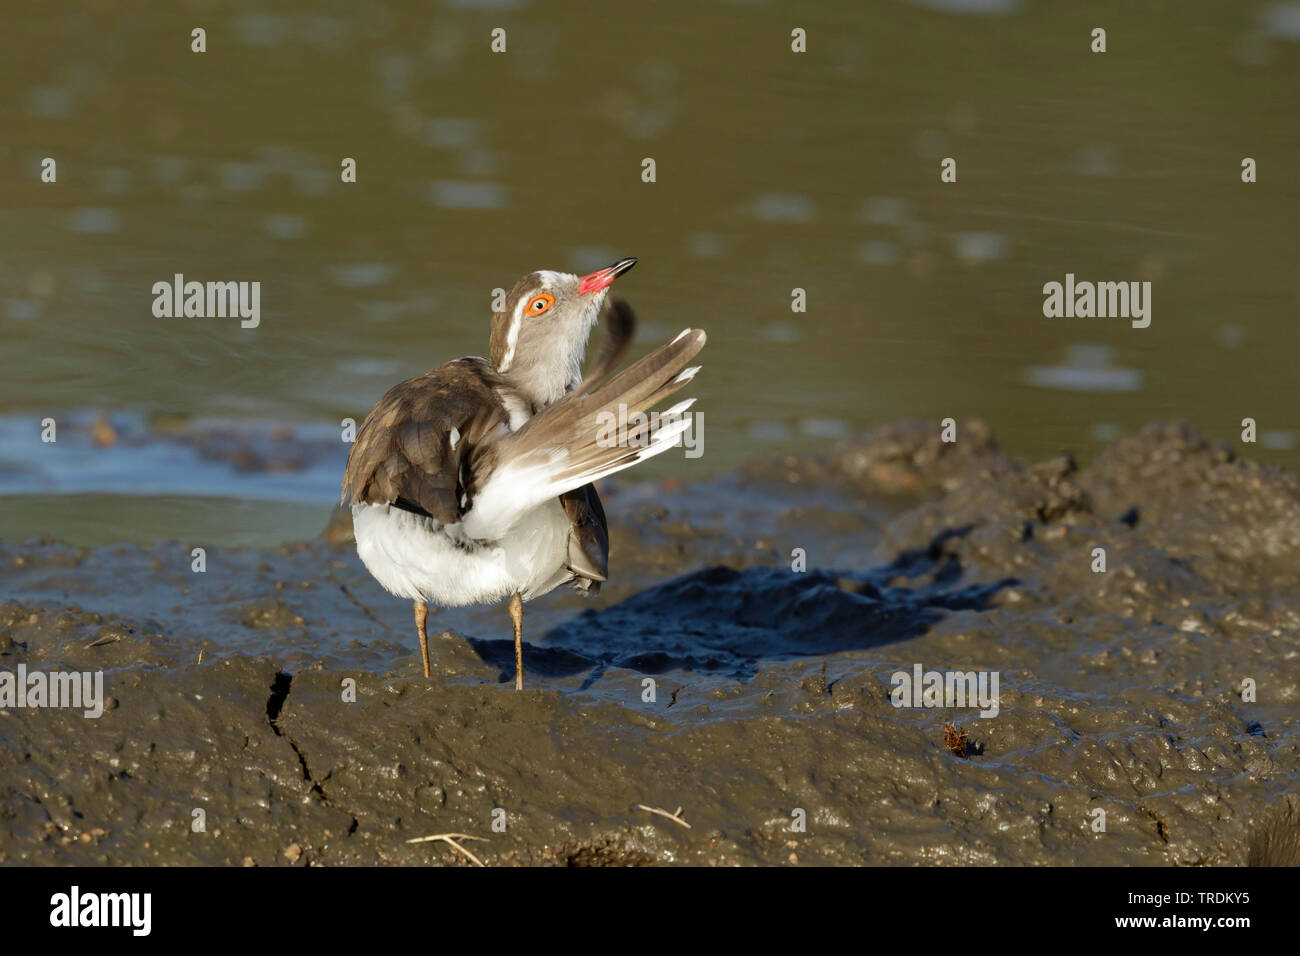 three-banded plover (Charadrius tricollaris), walking in mudd, South Africa, Mpumalanga, Kruger National Park Stock Photo